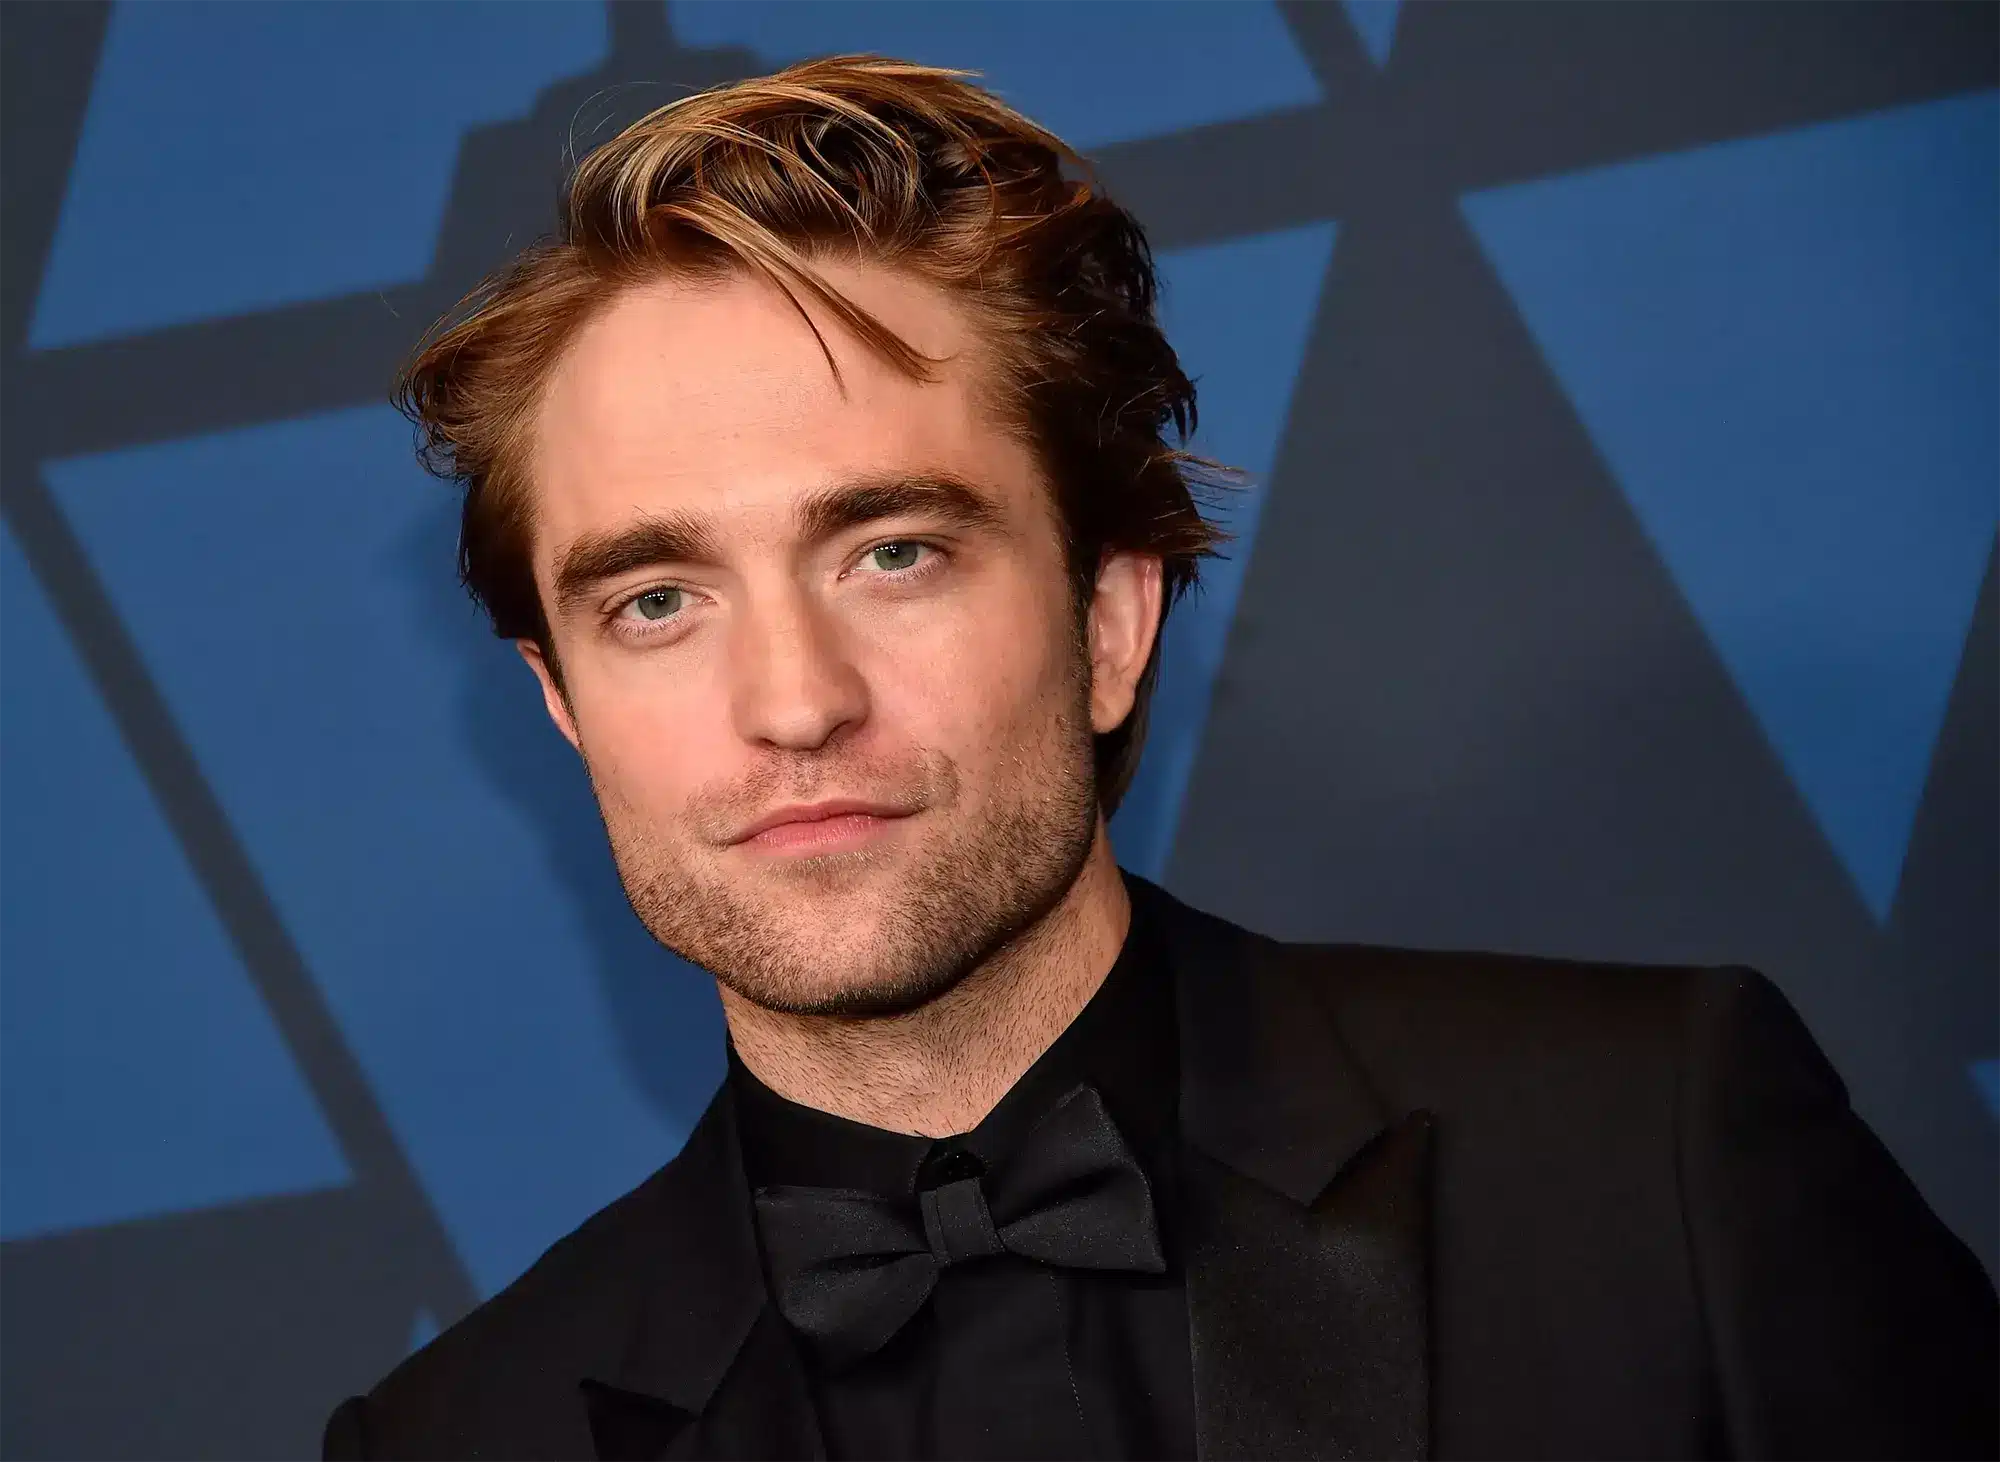 Robert Pattinson at the 11th Annual Governors Awards